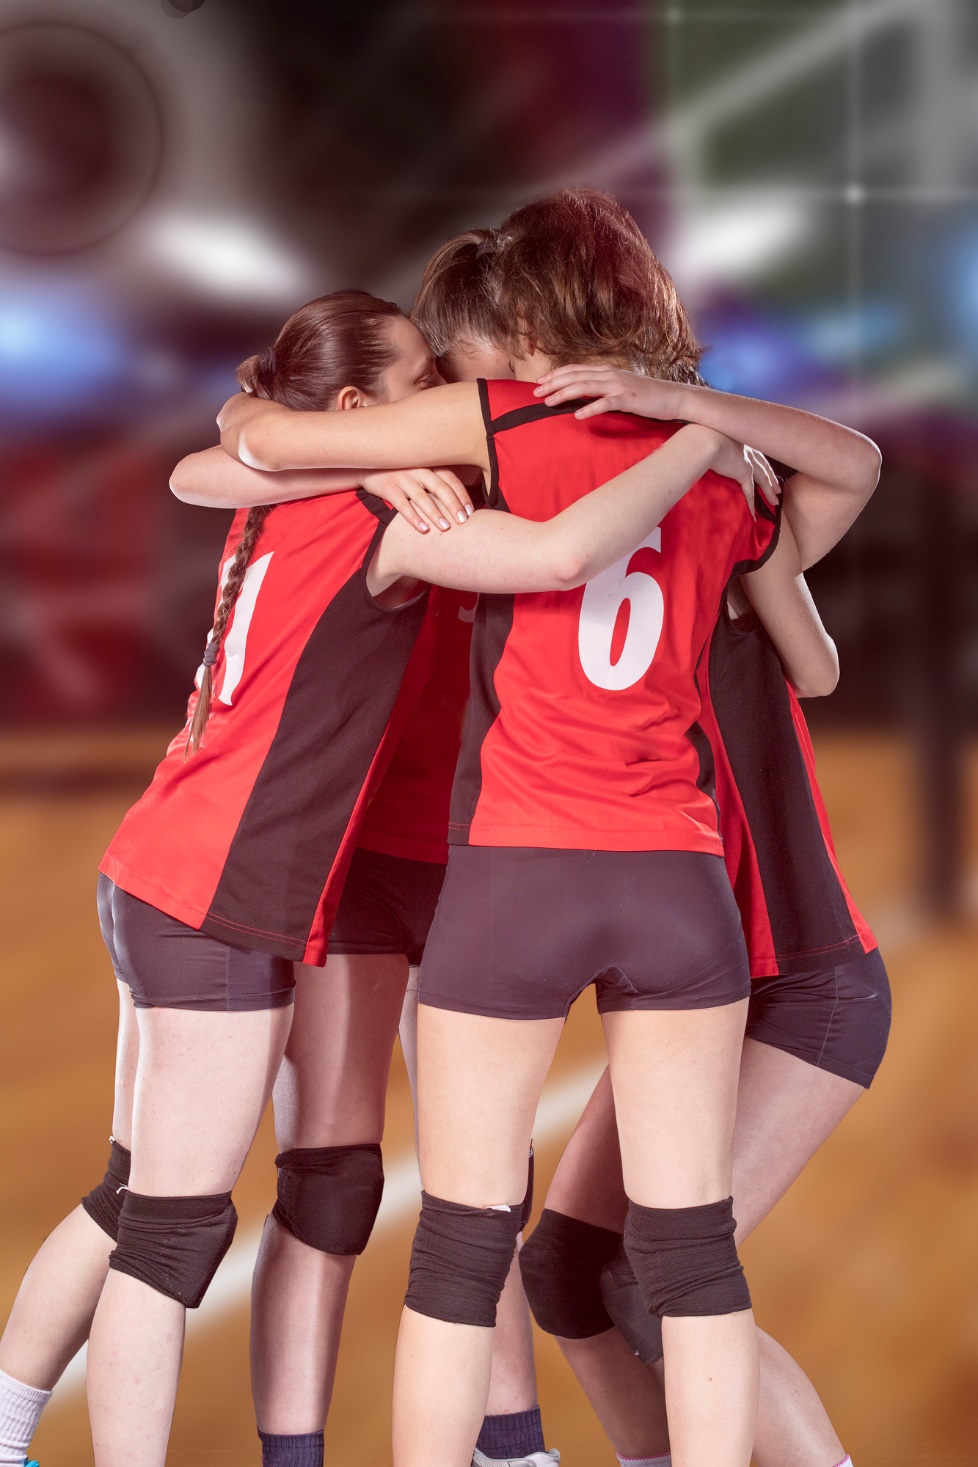 A group of women in sports uniforms hugging

Description automatically generated